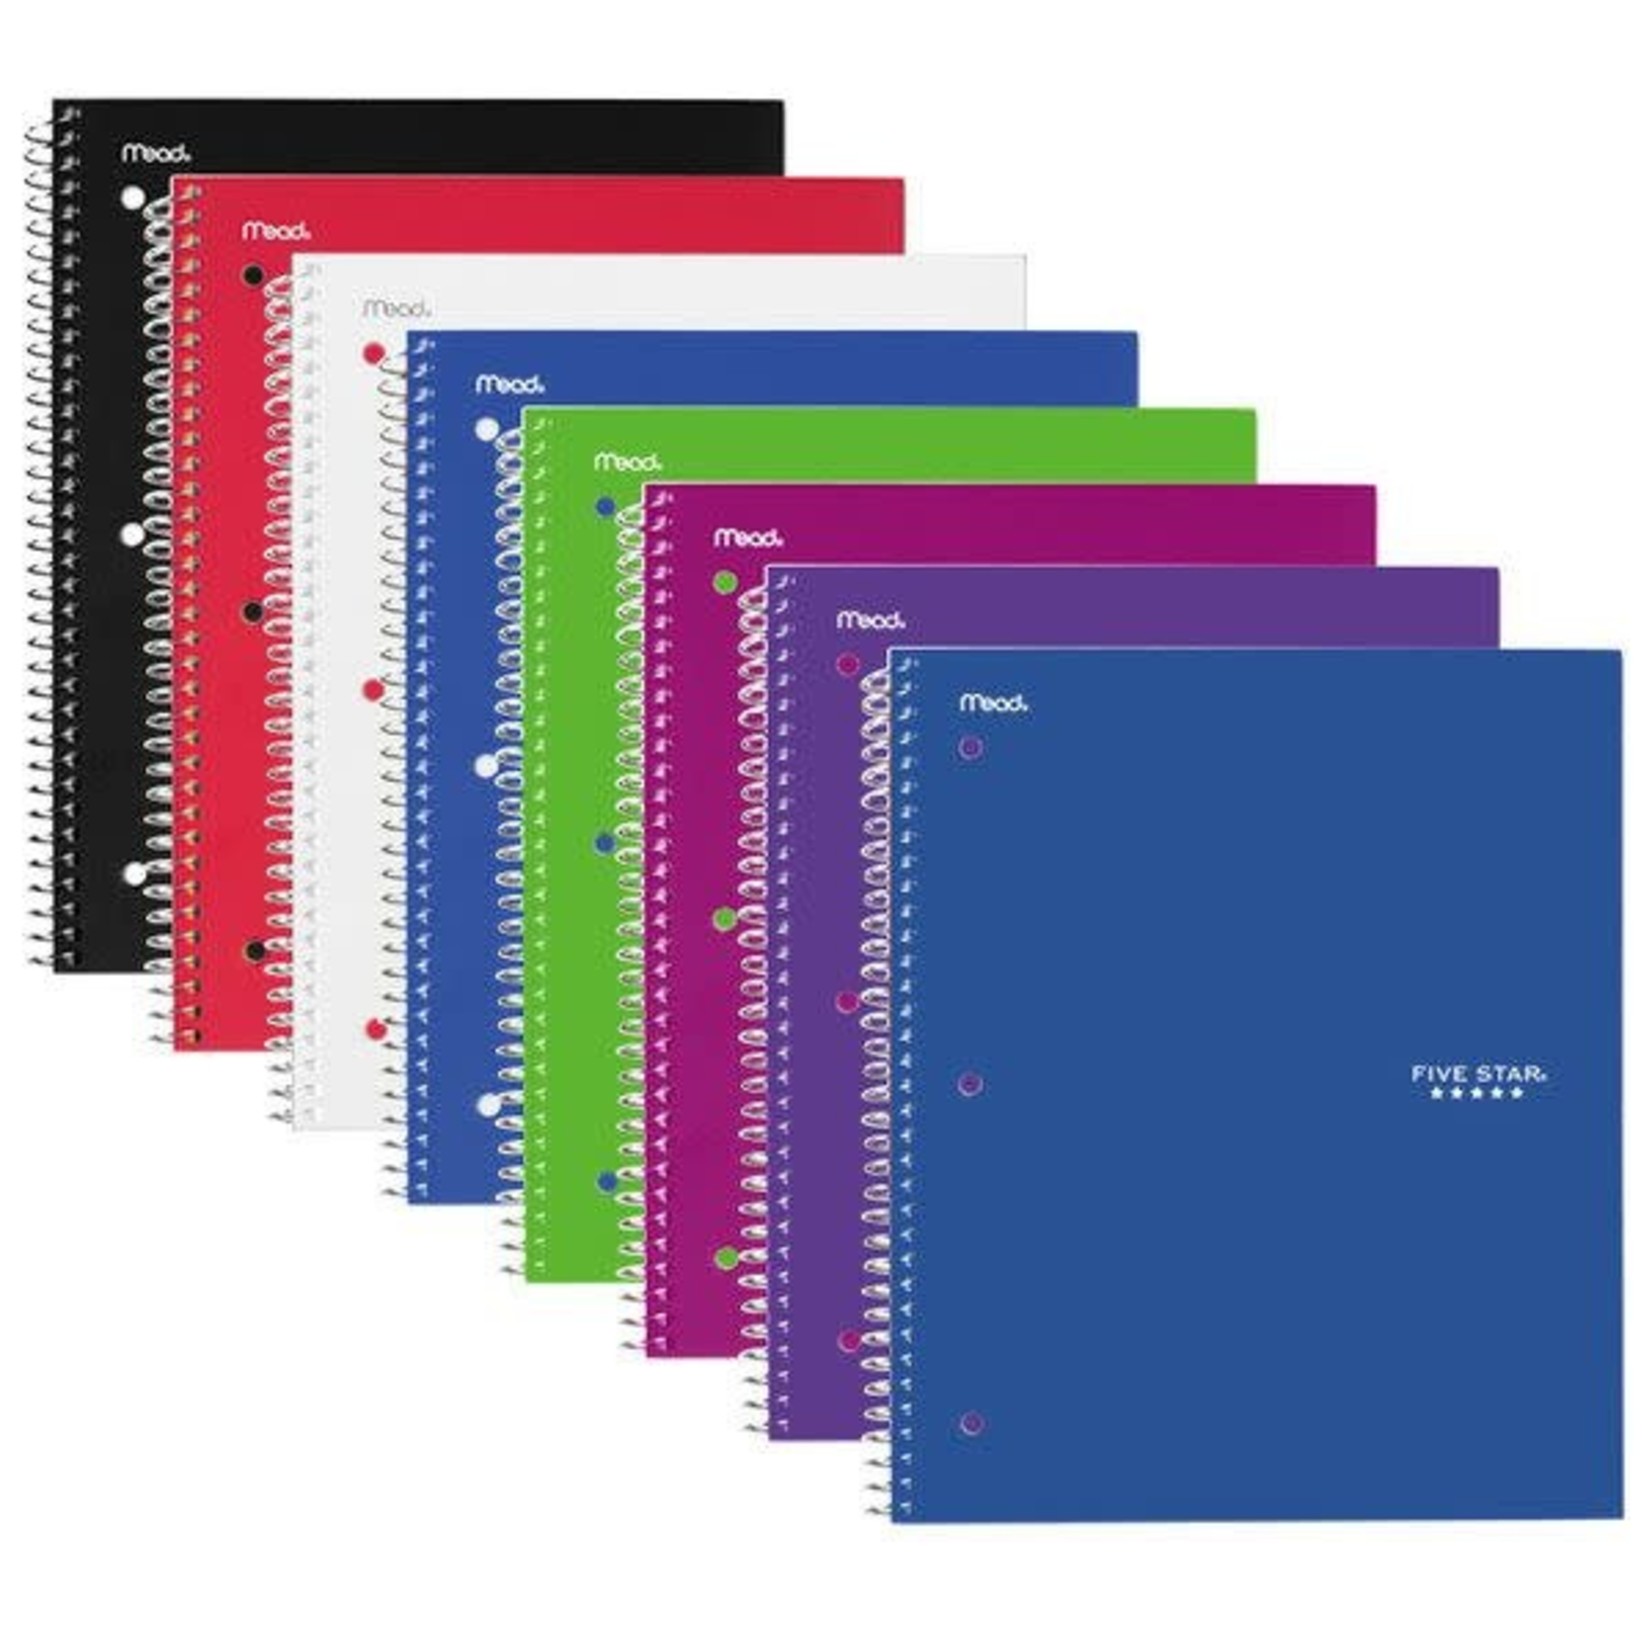 Five Star Quad Ruled Notebook - 200 pgs.